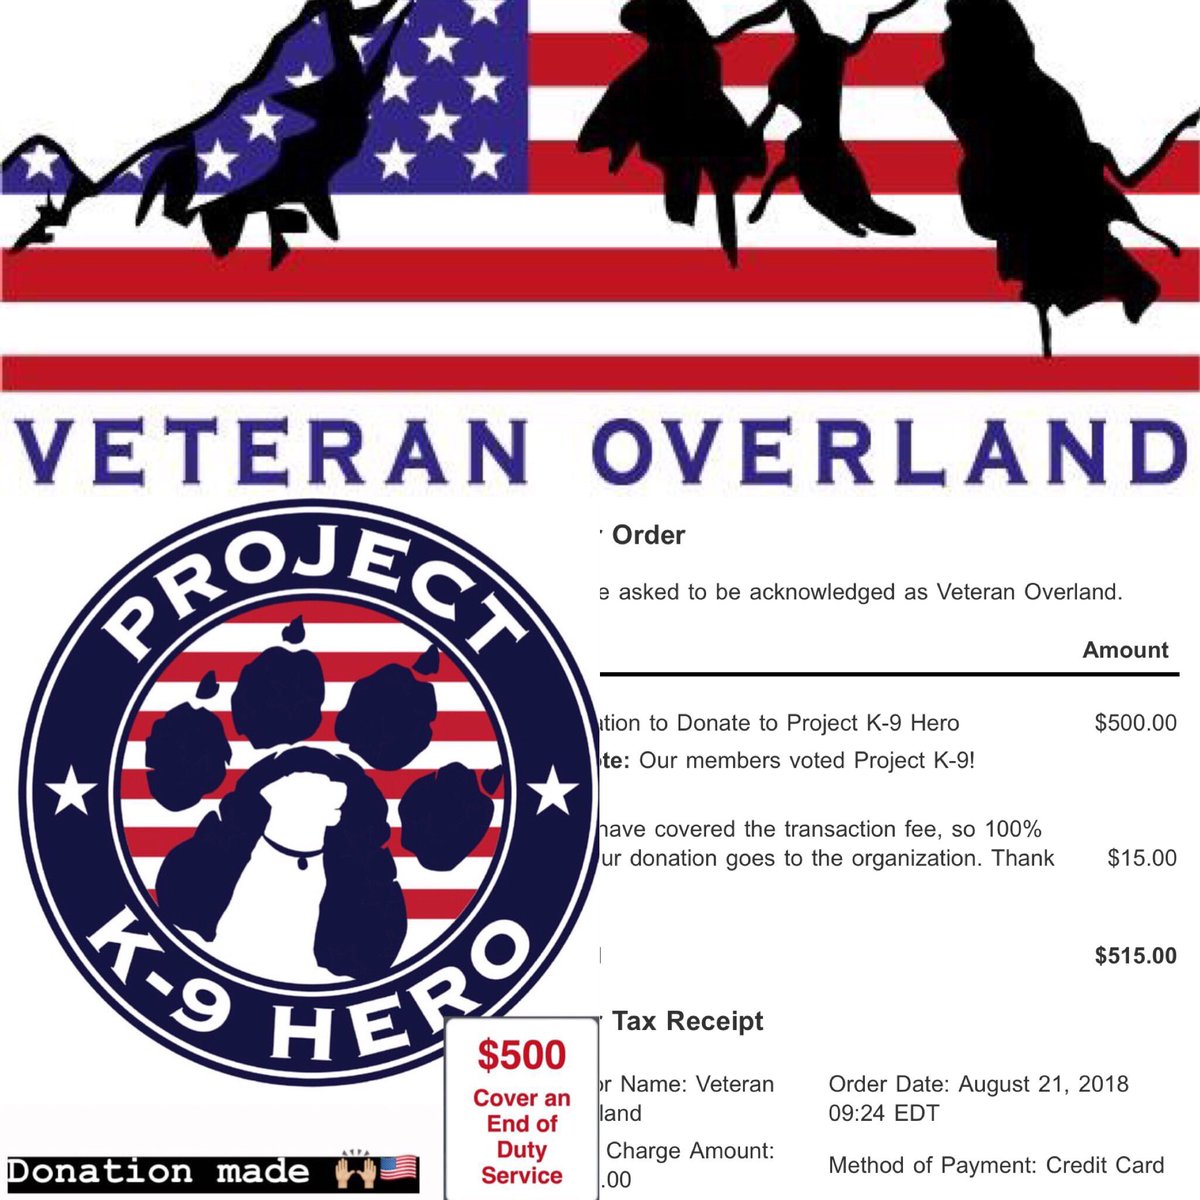 We would like to acknowledge our friends at @VeteranOverland today for voting Project K-9 Hero their charity of choice as a member driven organization. Today they donated $500 to help us cover an end of duty services for one of our retired K-9 Heroes. 

veteranoverland.com